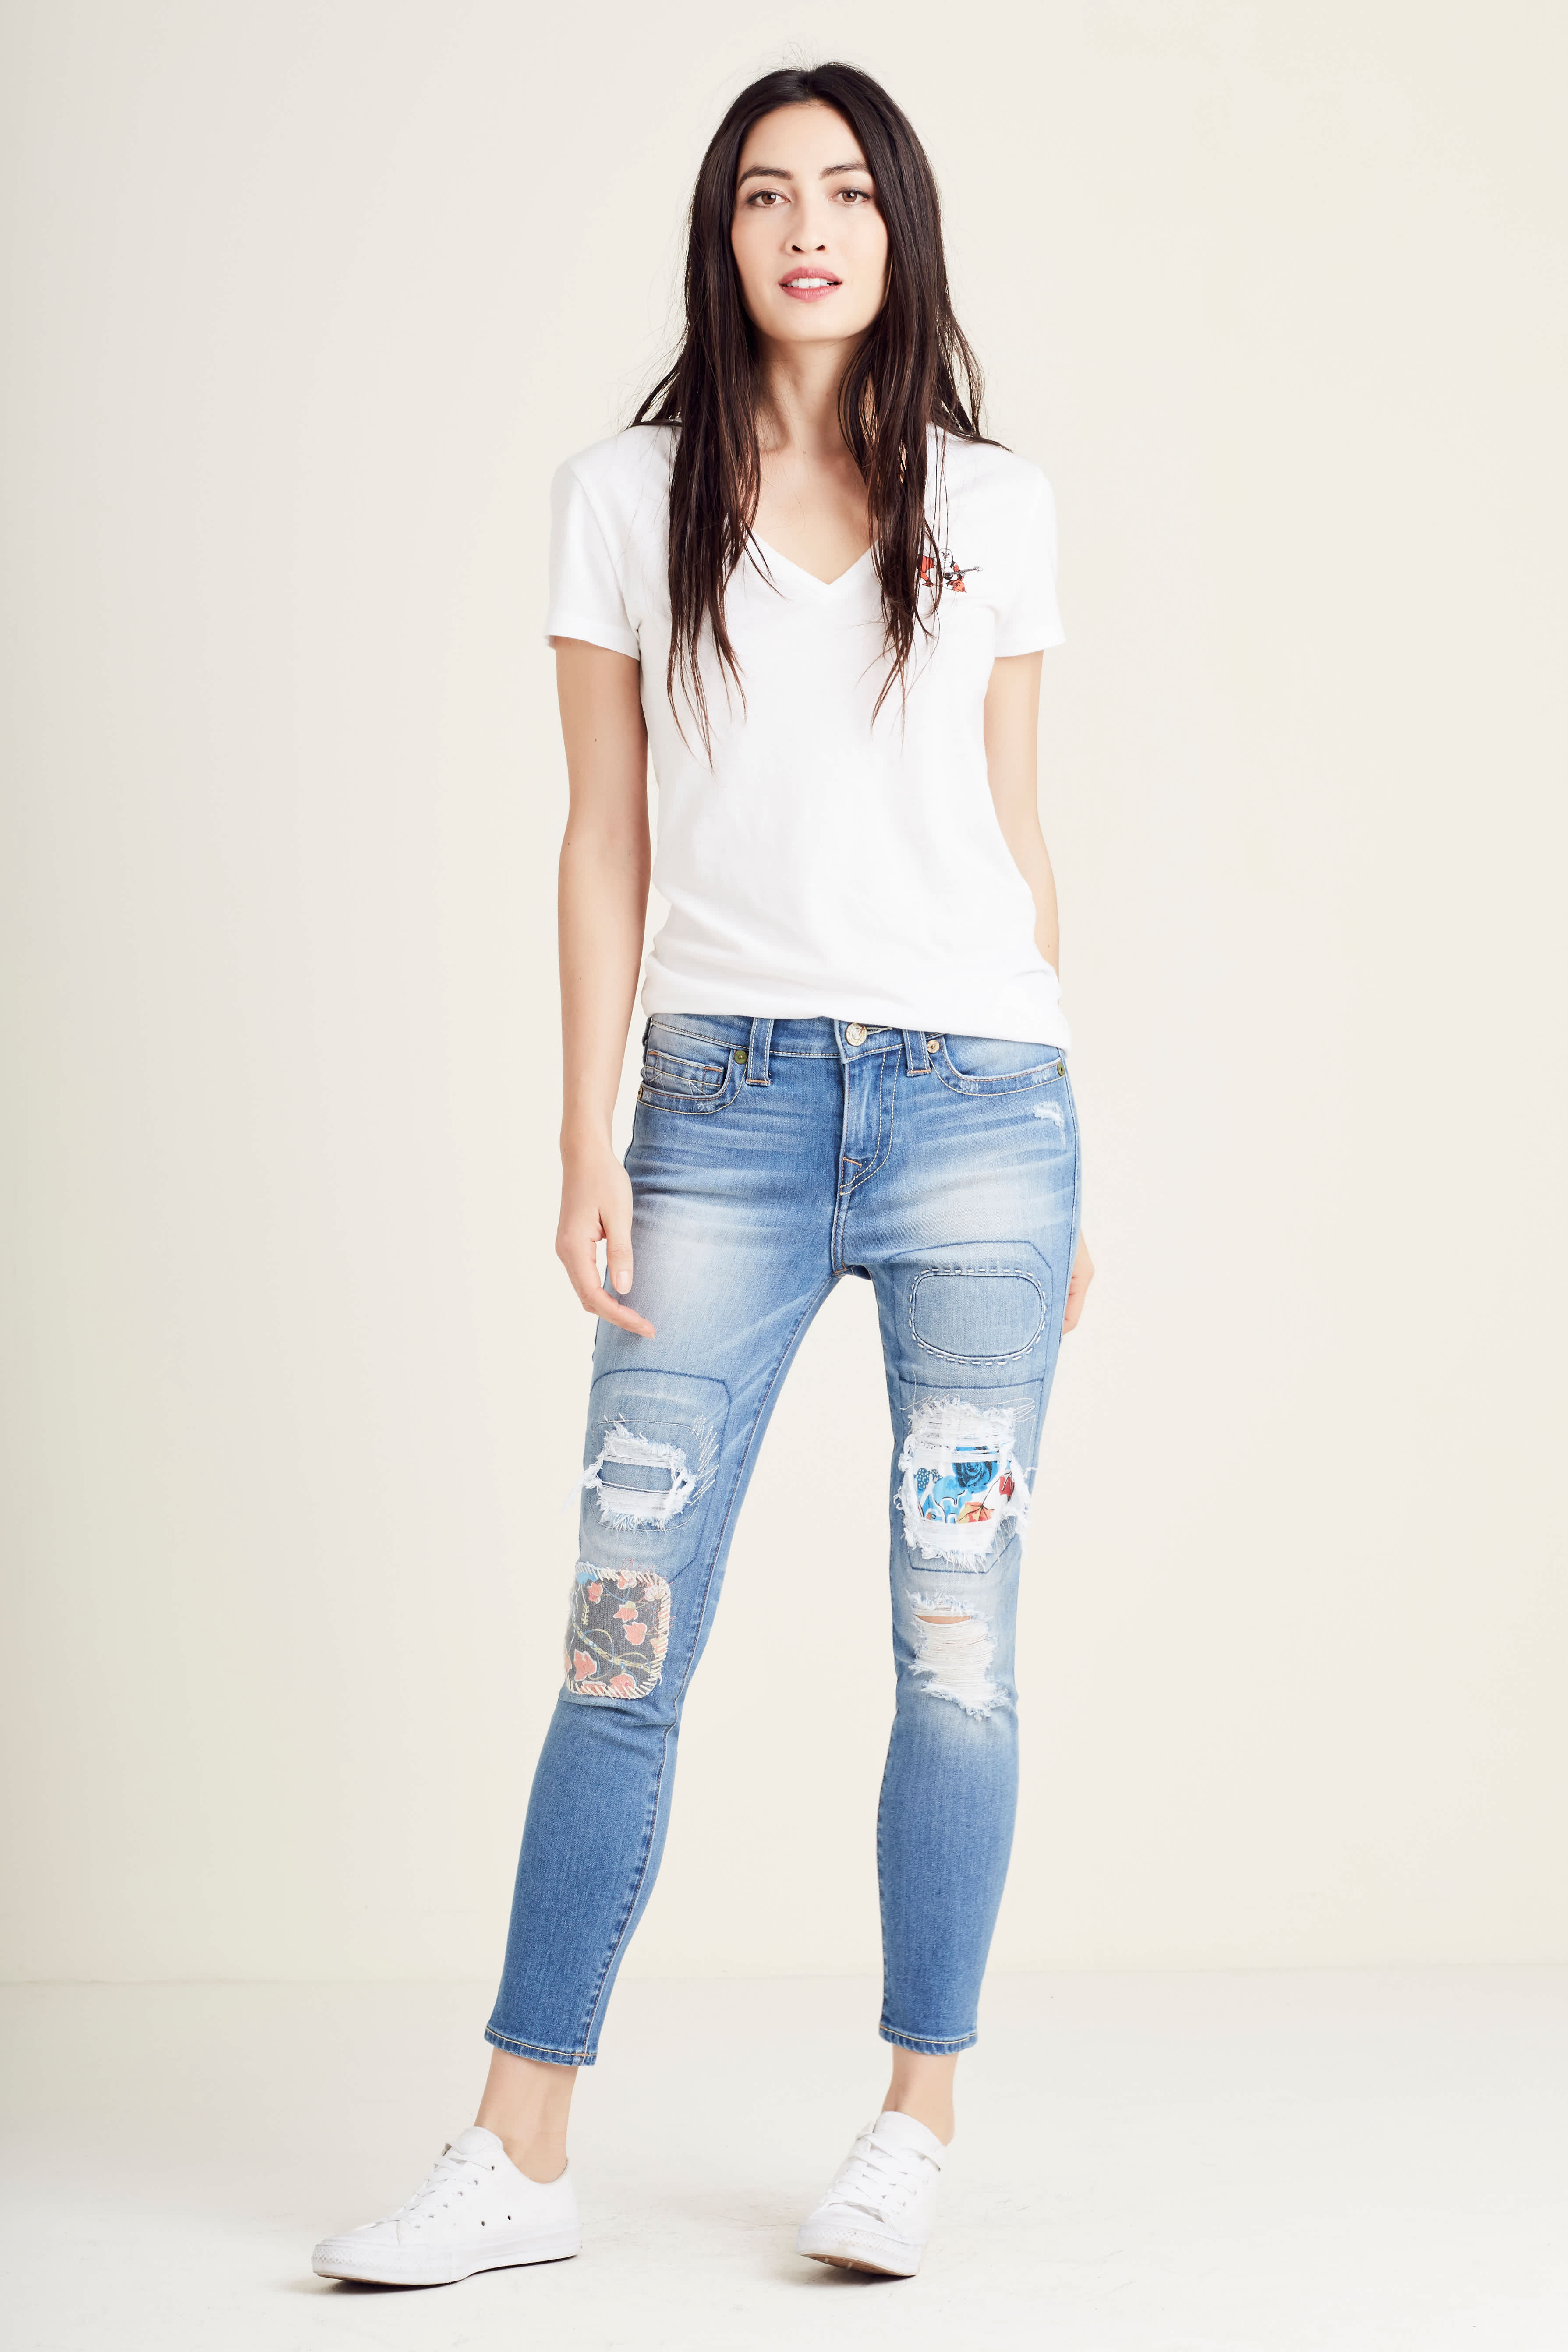 HALLE MID RISE SKINNY CROPPED WOMENS JEAN